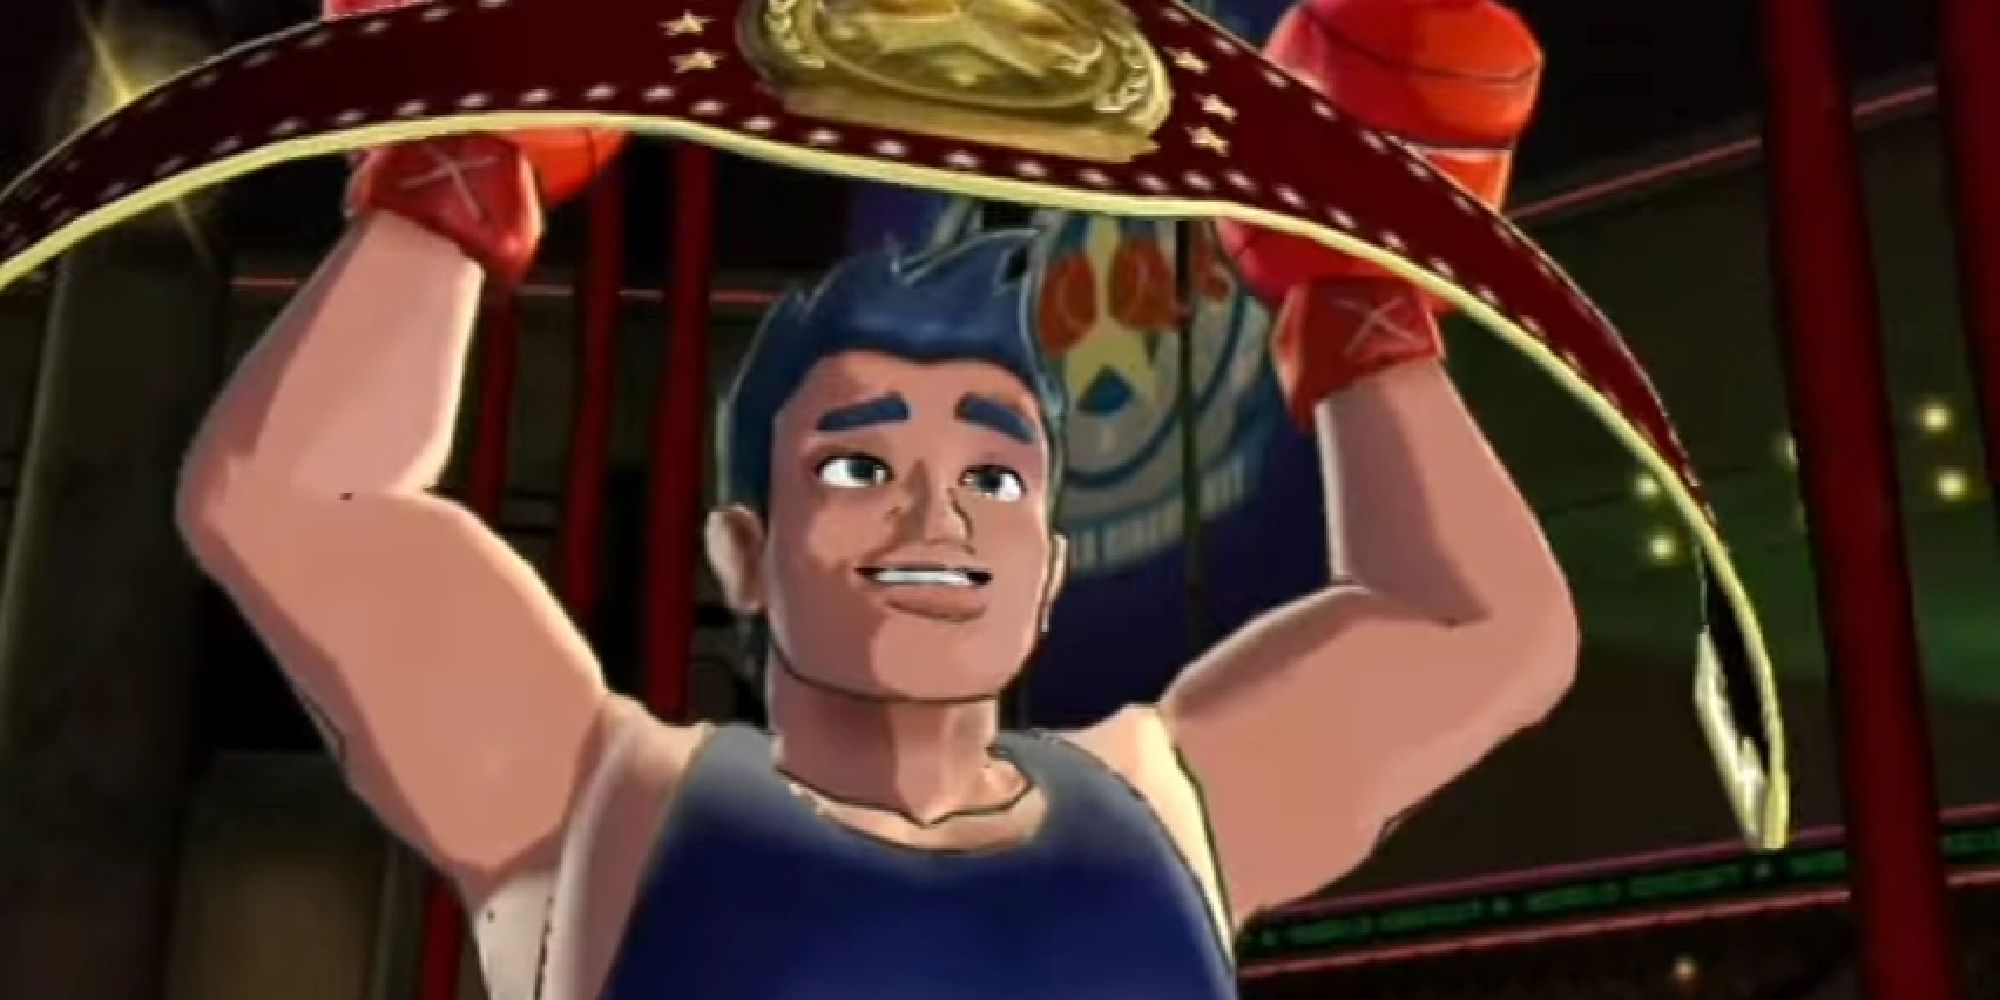 Little Mac holding a championship belt in Punch-Out!! for Wii